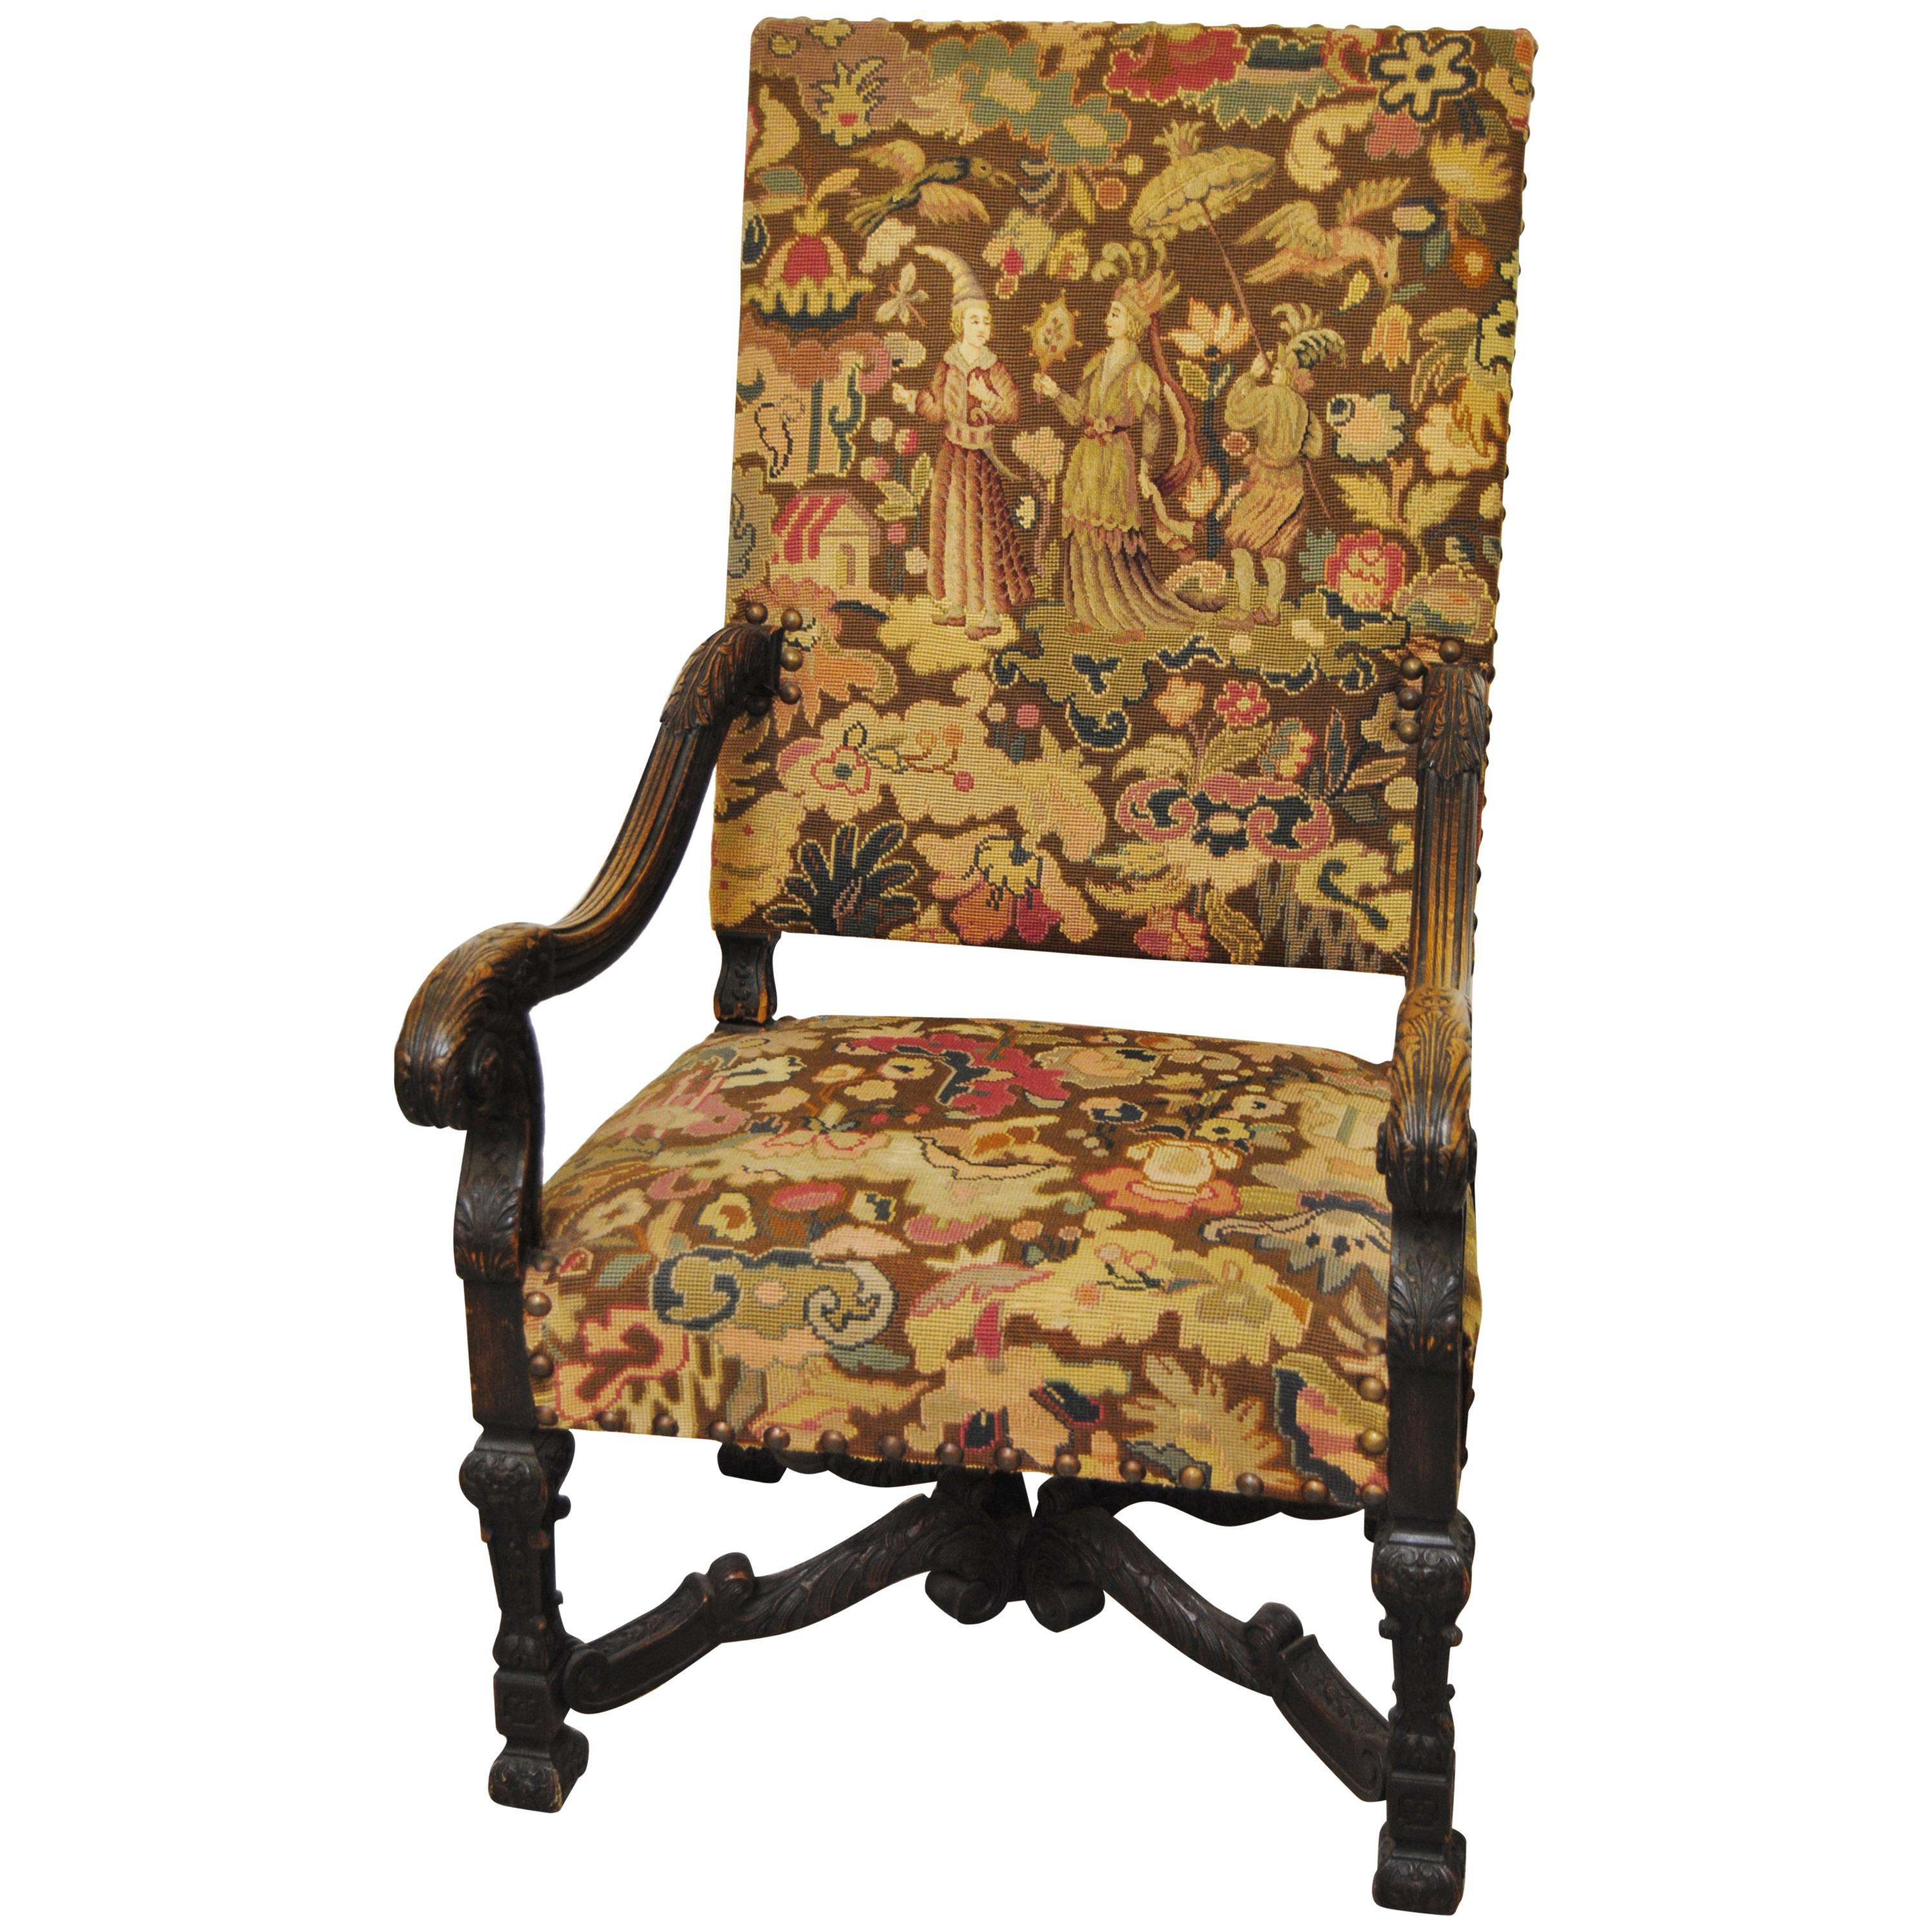 Antique French Chair with Original Needlepoint Upholstery For Sale